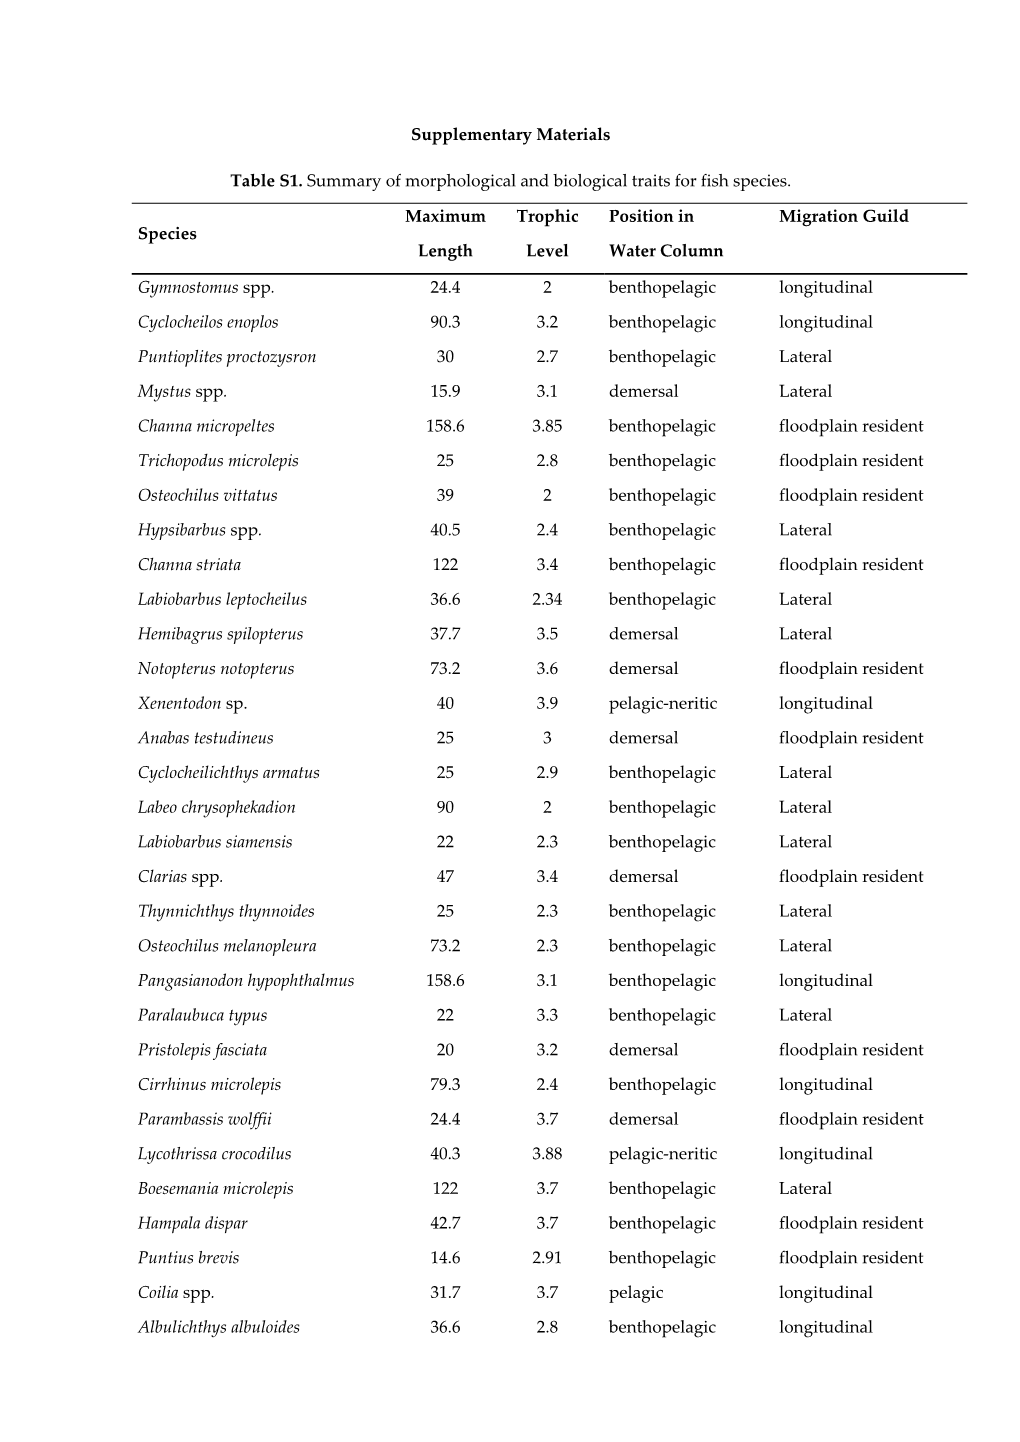 Supplementary Materials Table S1. Summary of Morphological and Biological Traits for Fish Species. Species Maximum Length Trophi